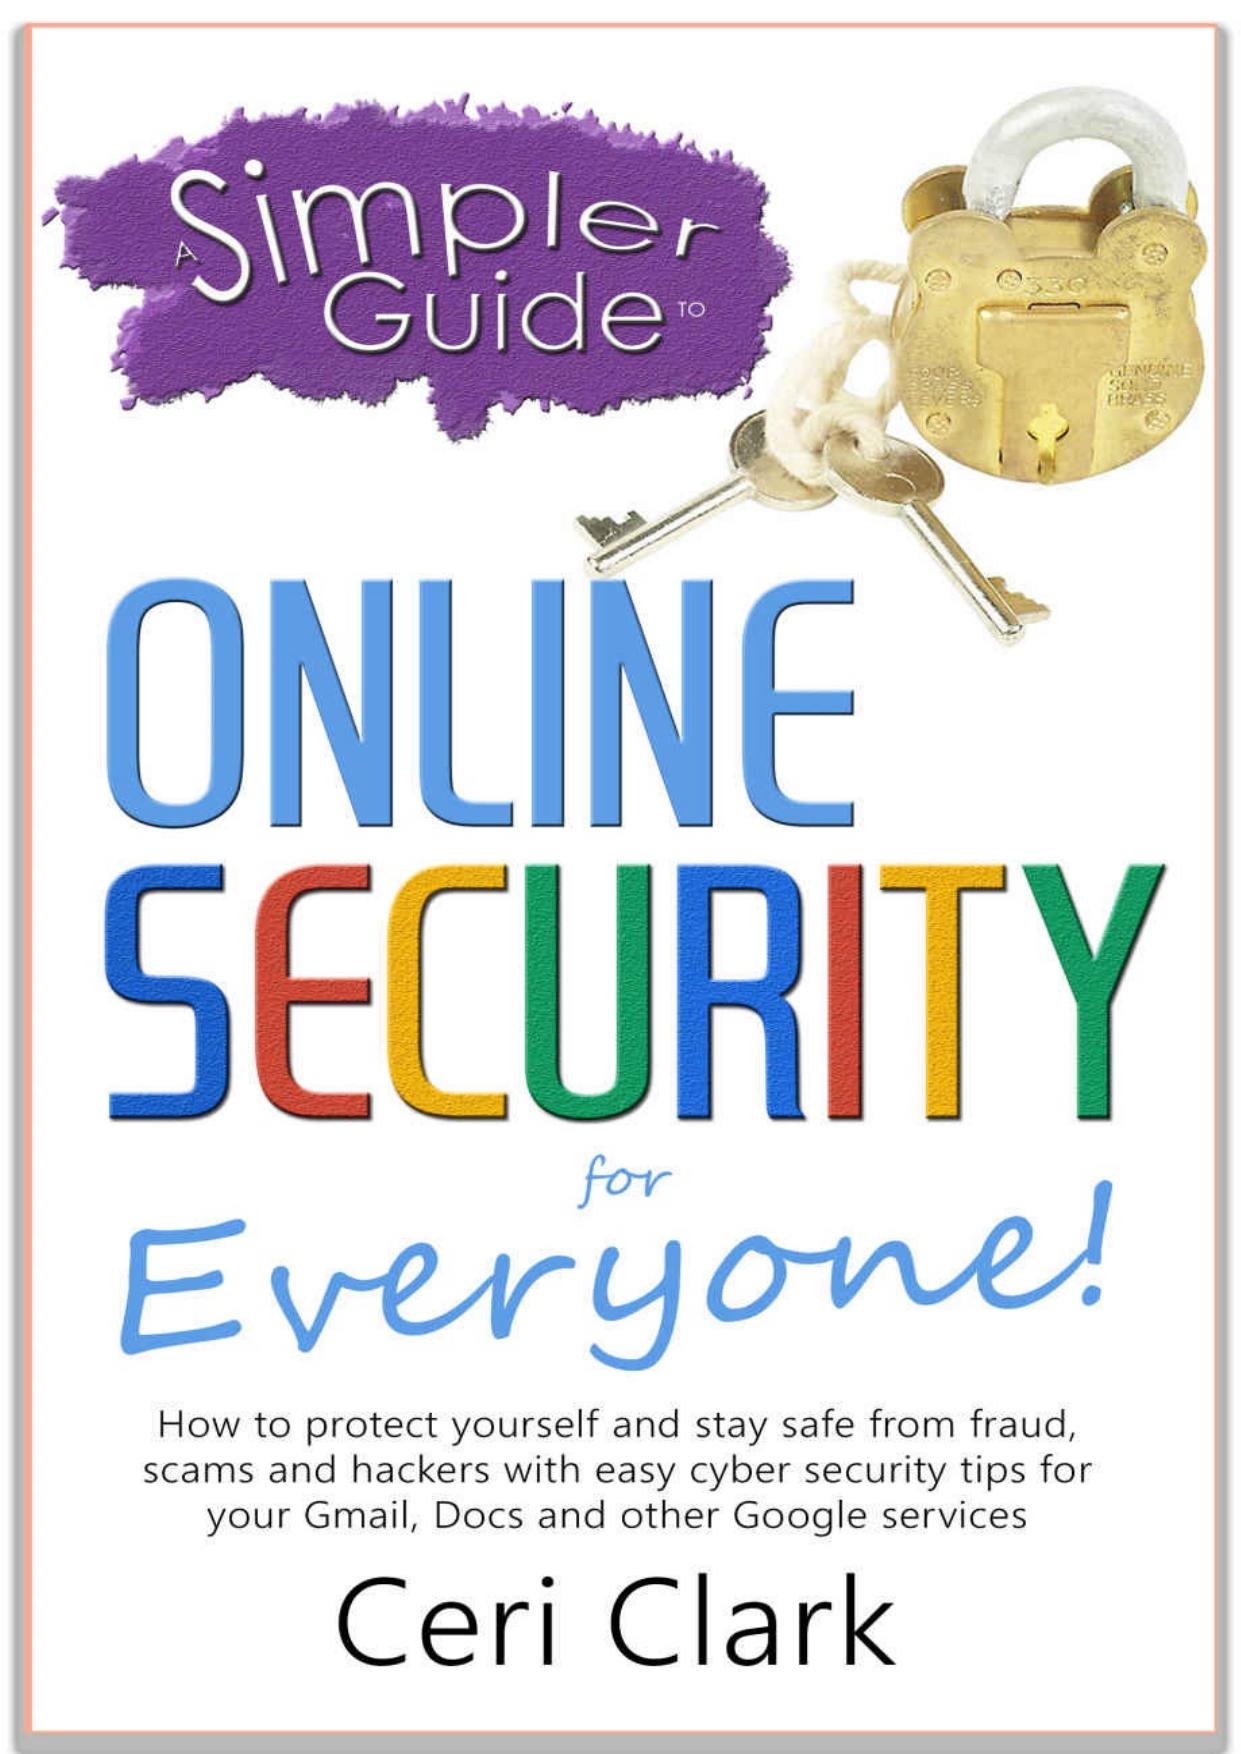 A Simpler Guide to Online Security for Everyone: How to protect yourself and stay safe from fraud, scams and hackers with easy cyber security tips for ... and other Google services (Simpler Guides) by Ceri Clark